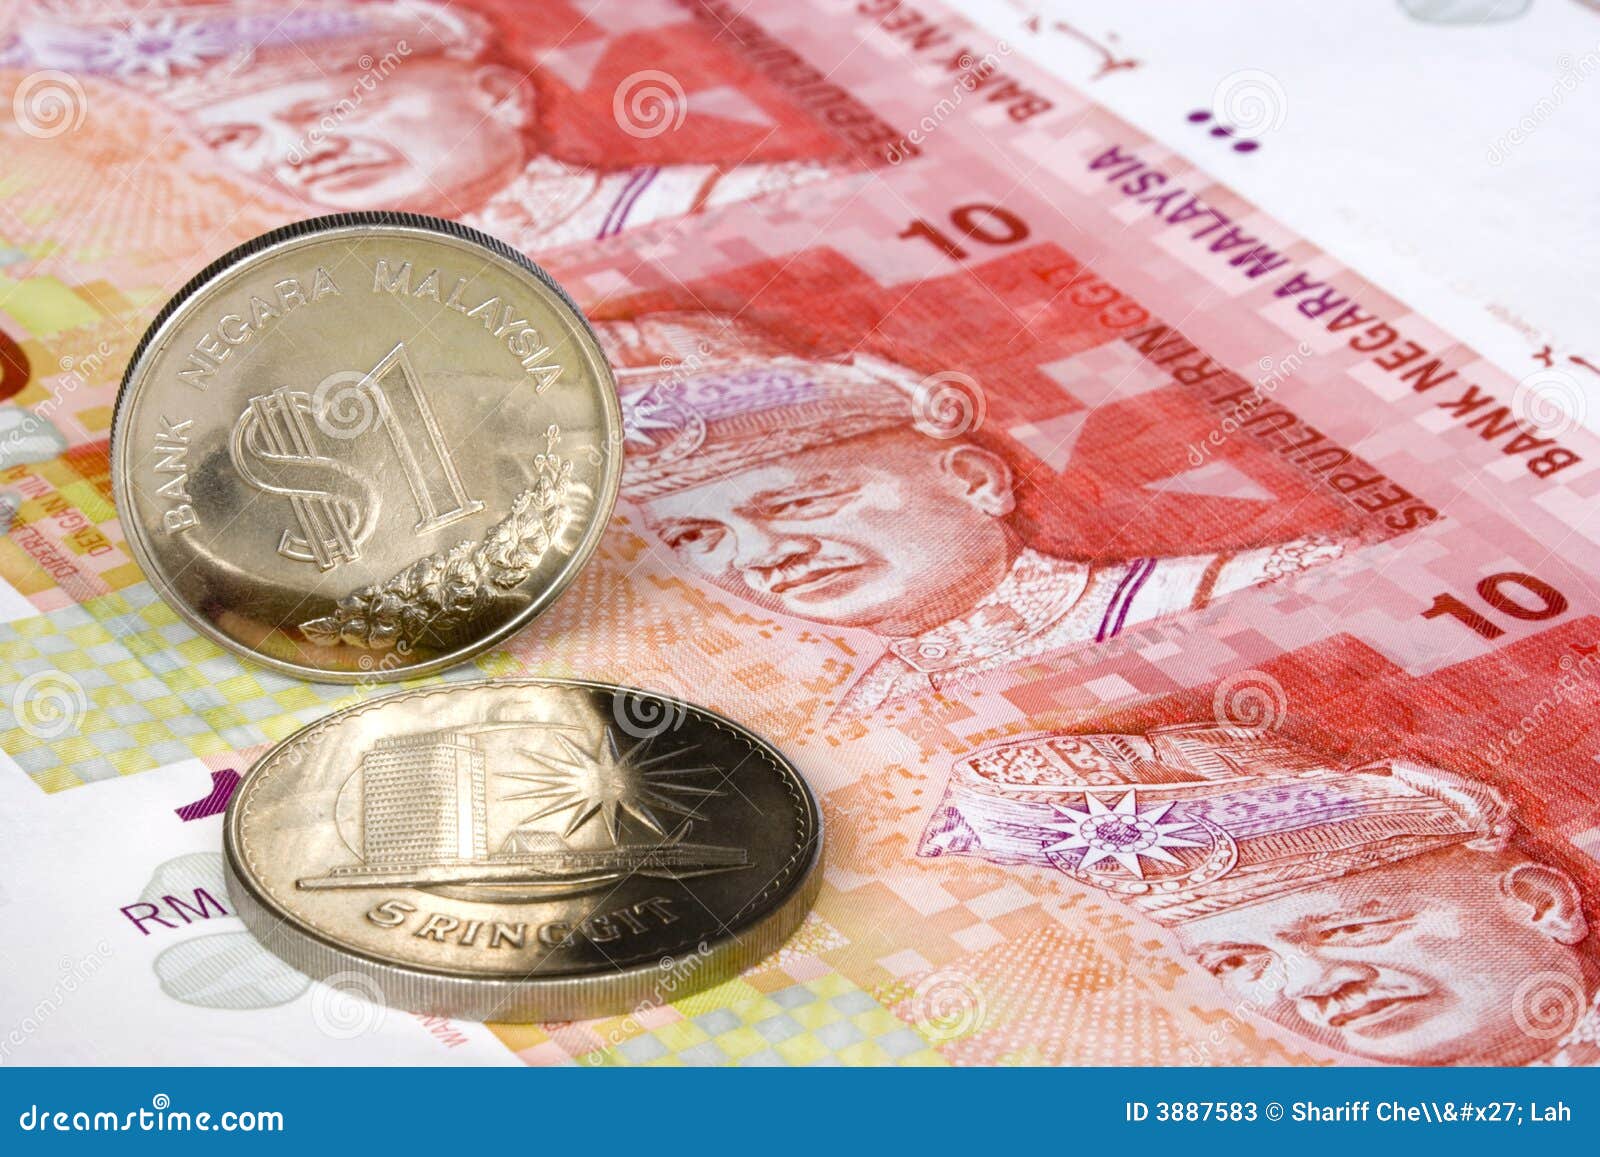 Malaysian currency stock image. Image of banknotes, valuable  3887583